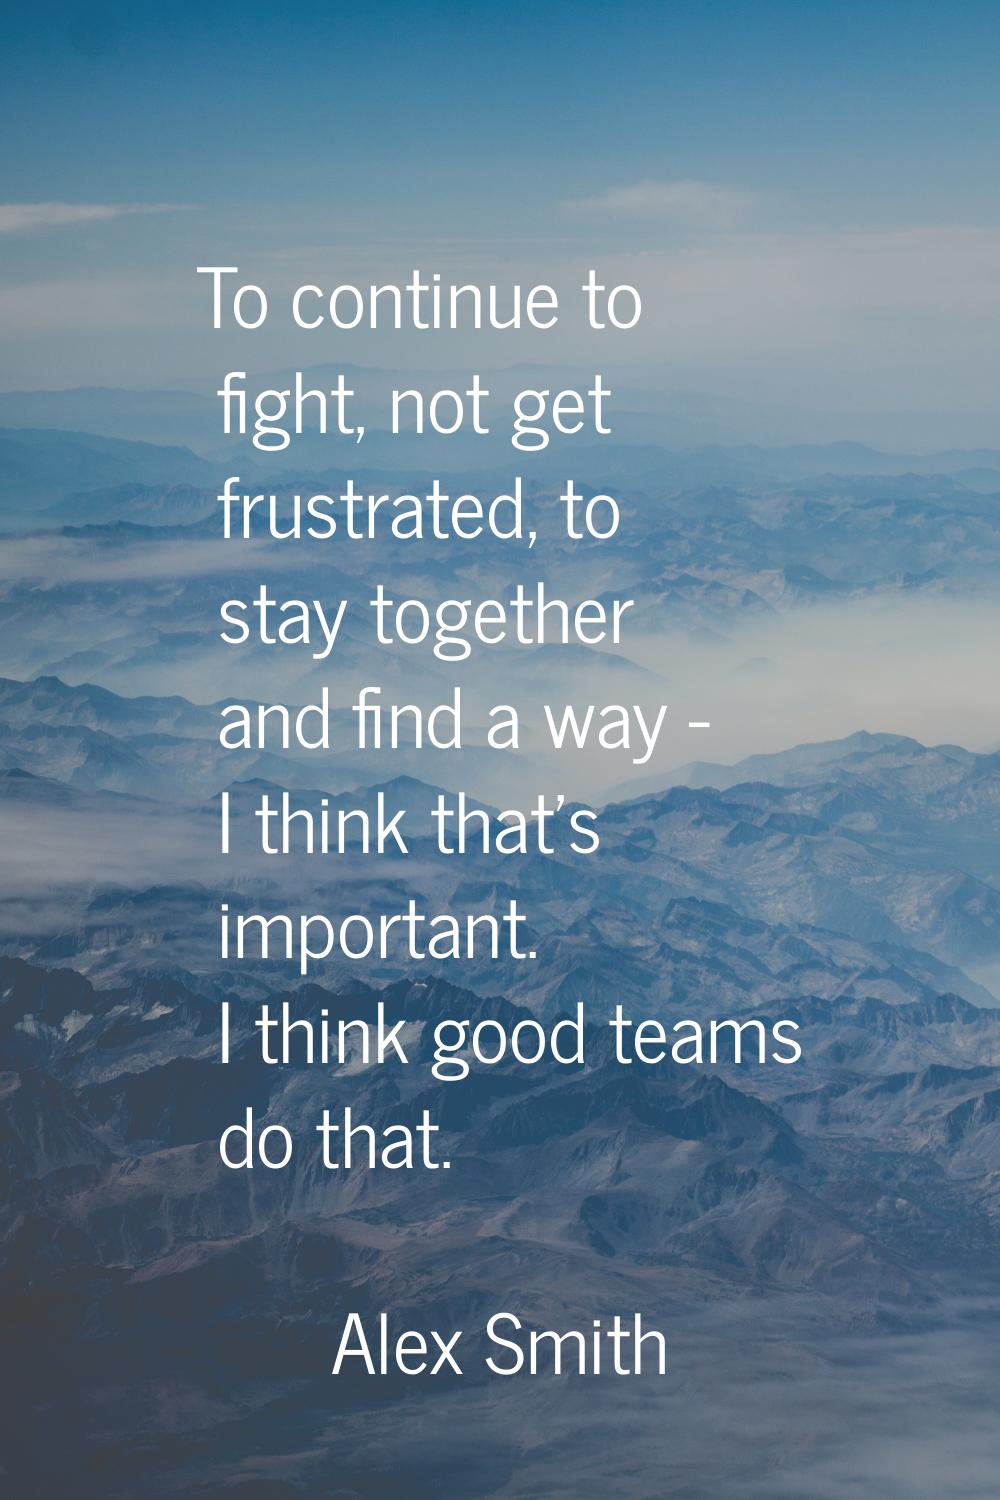 To continue to fight, not get frustrated, to stay together and find a way - I think that's importan